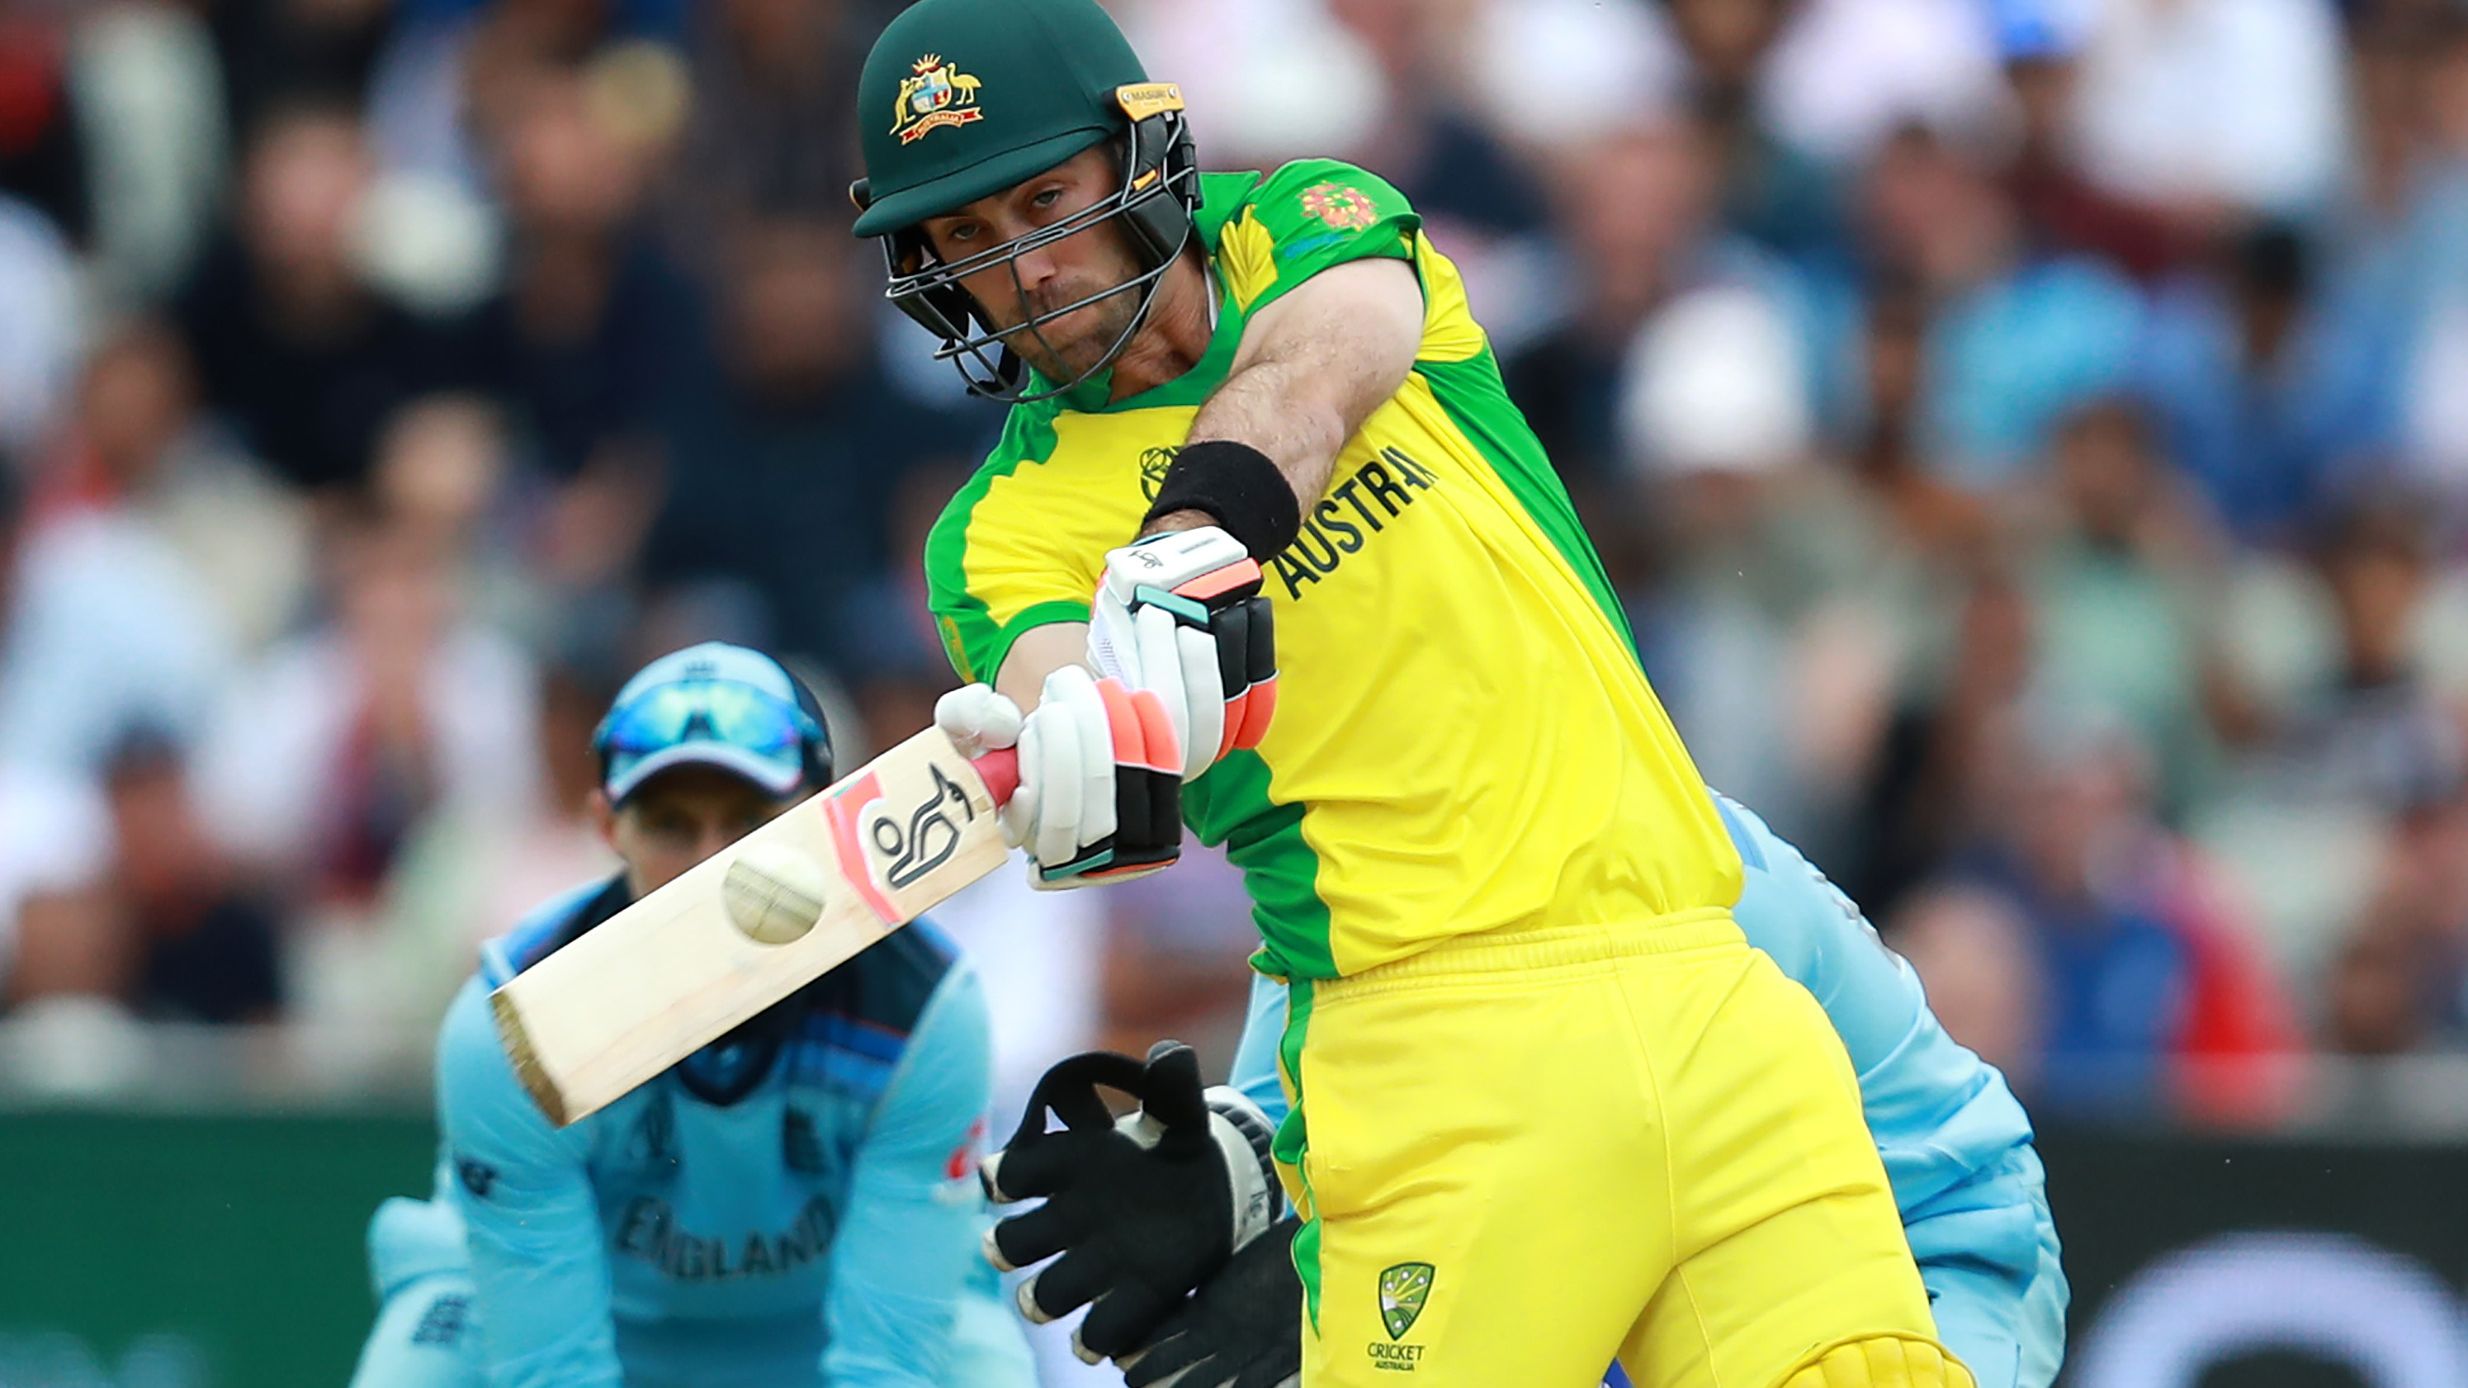 Glenn Maxwell, Marcus Stoinis to be axed from Australia ODI squad